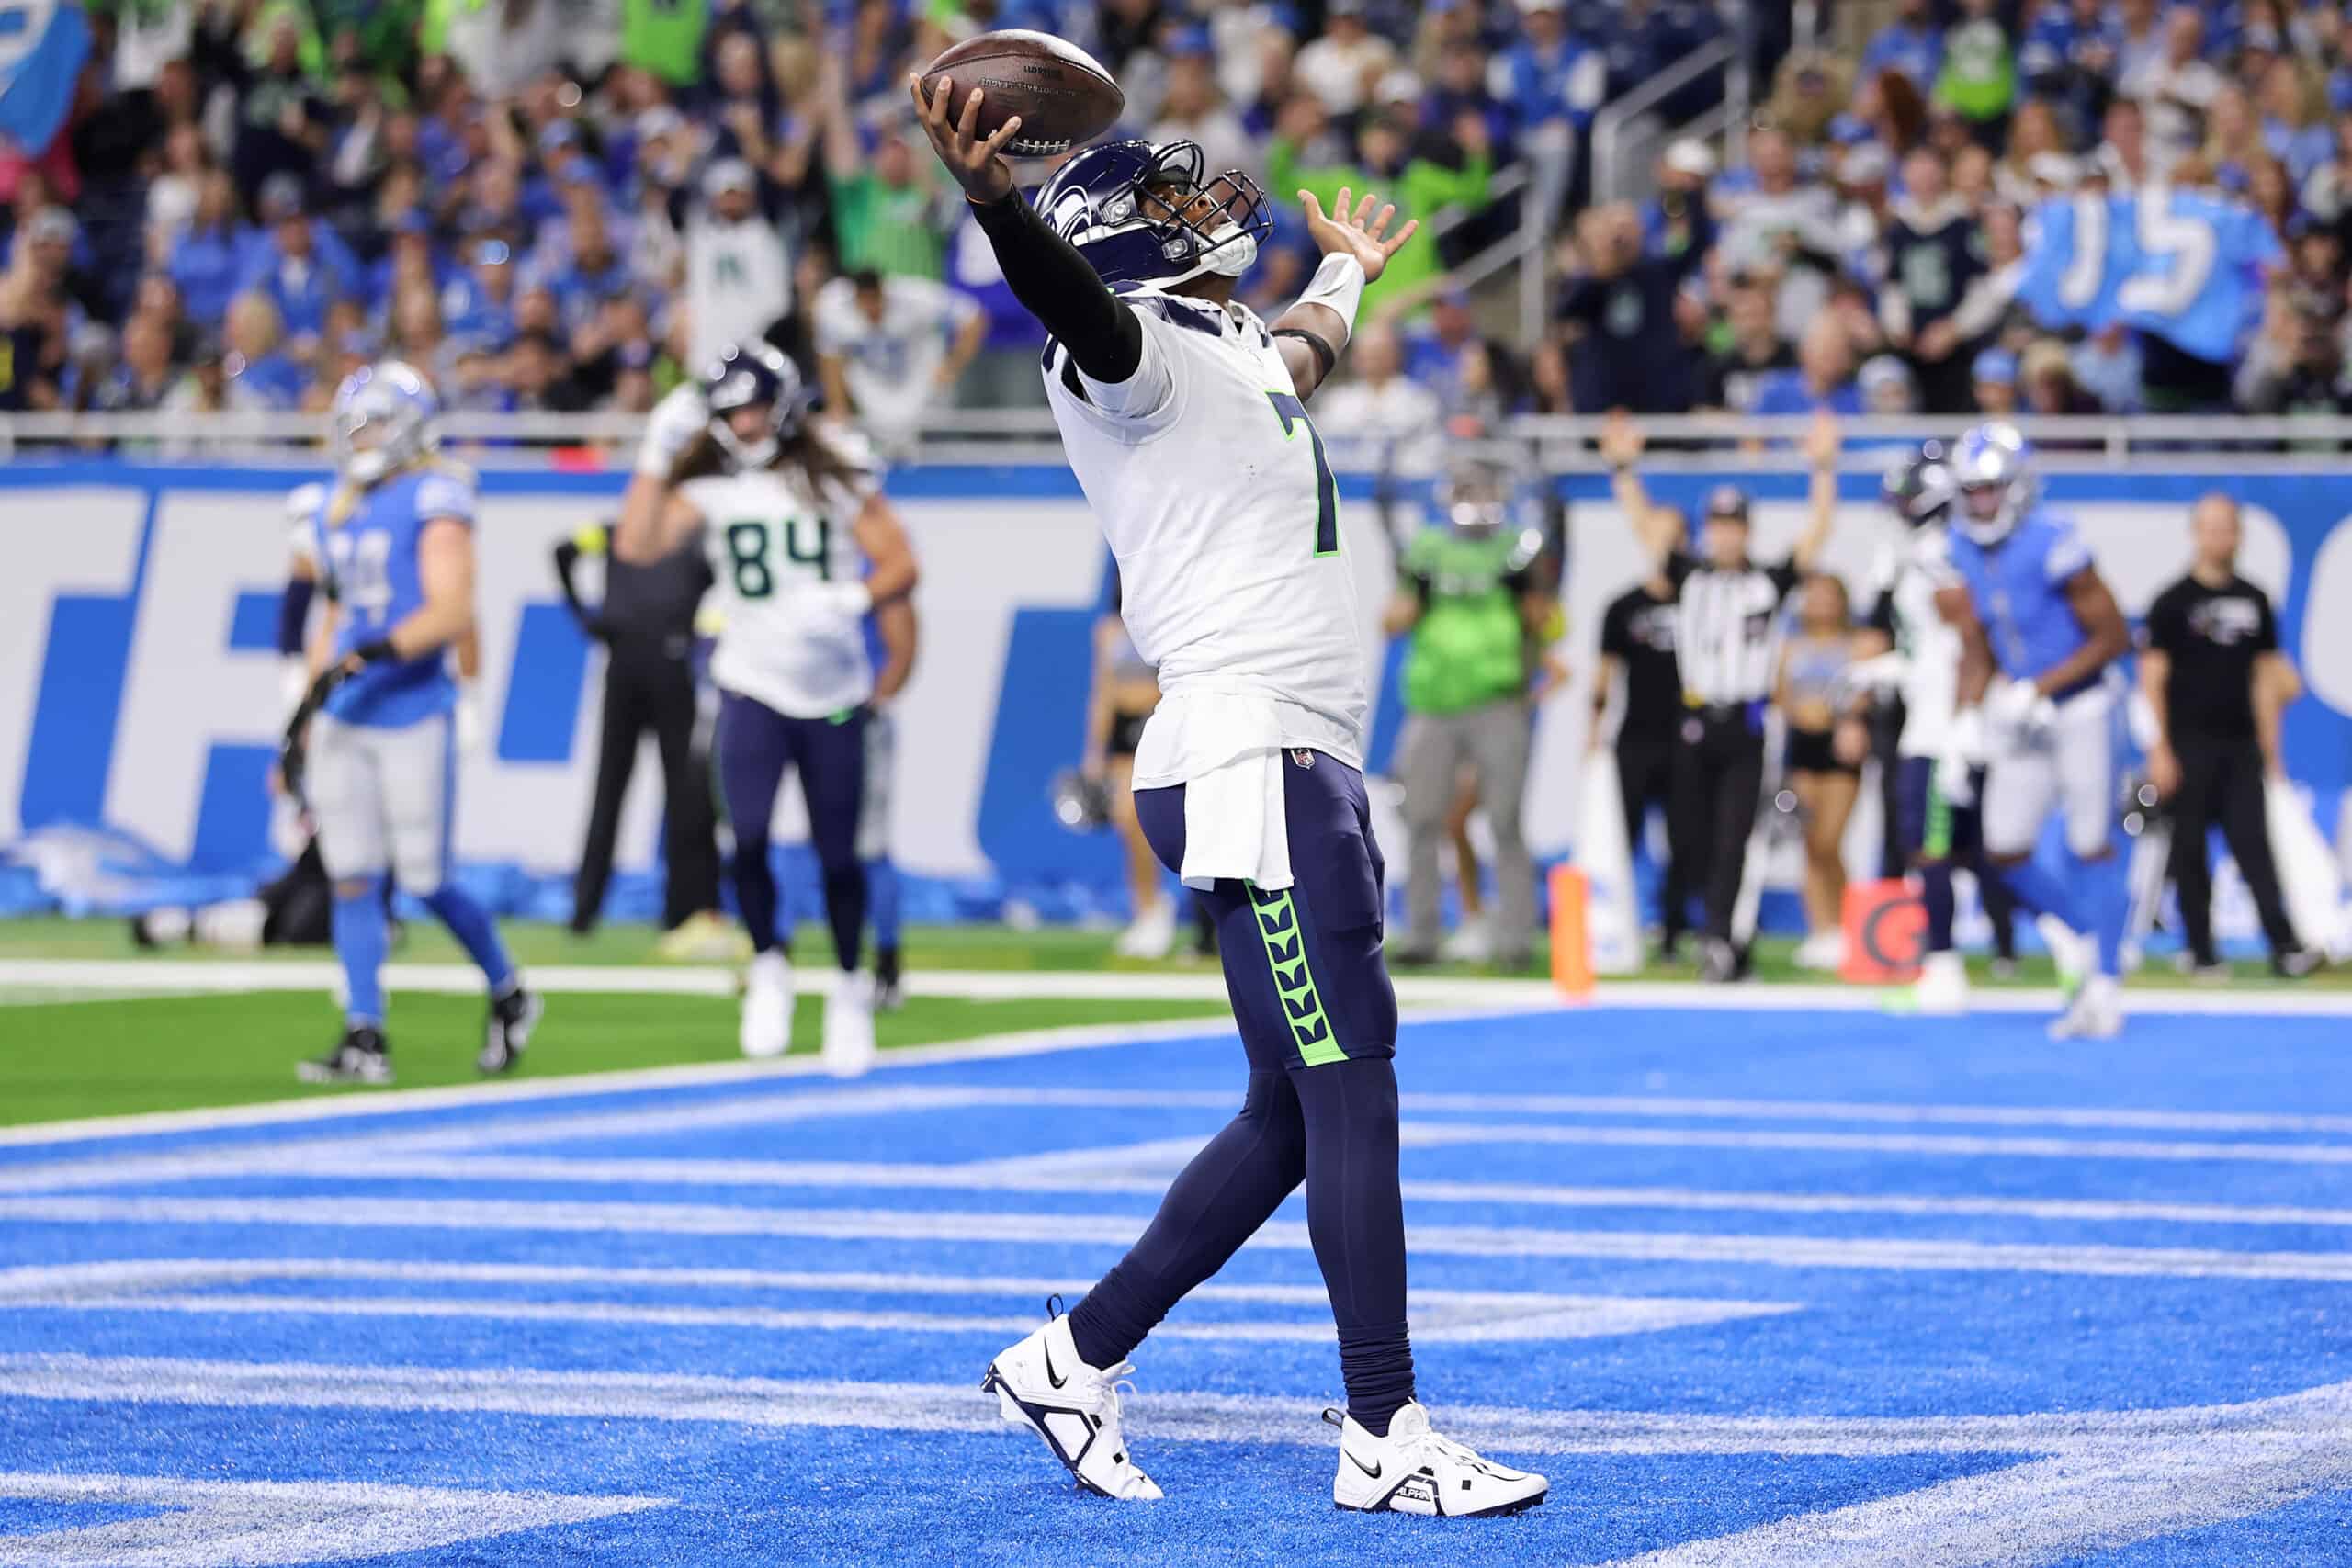 2023 Roster Outlook (offense): What do the Seahawks do with Geno